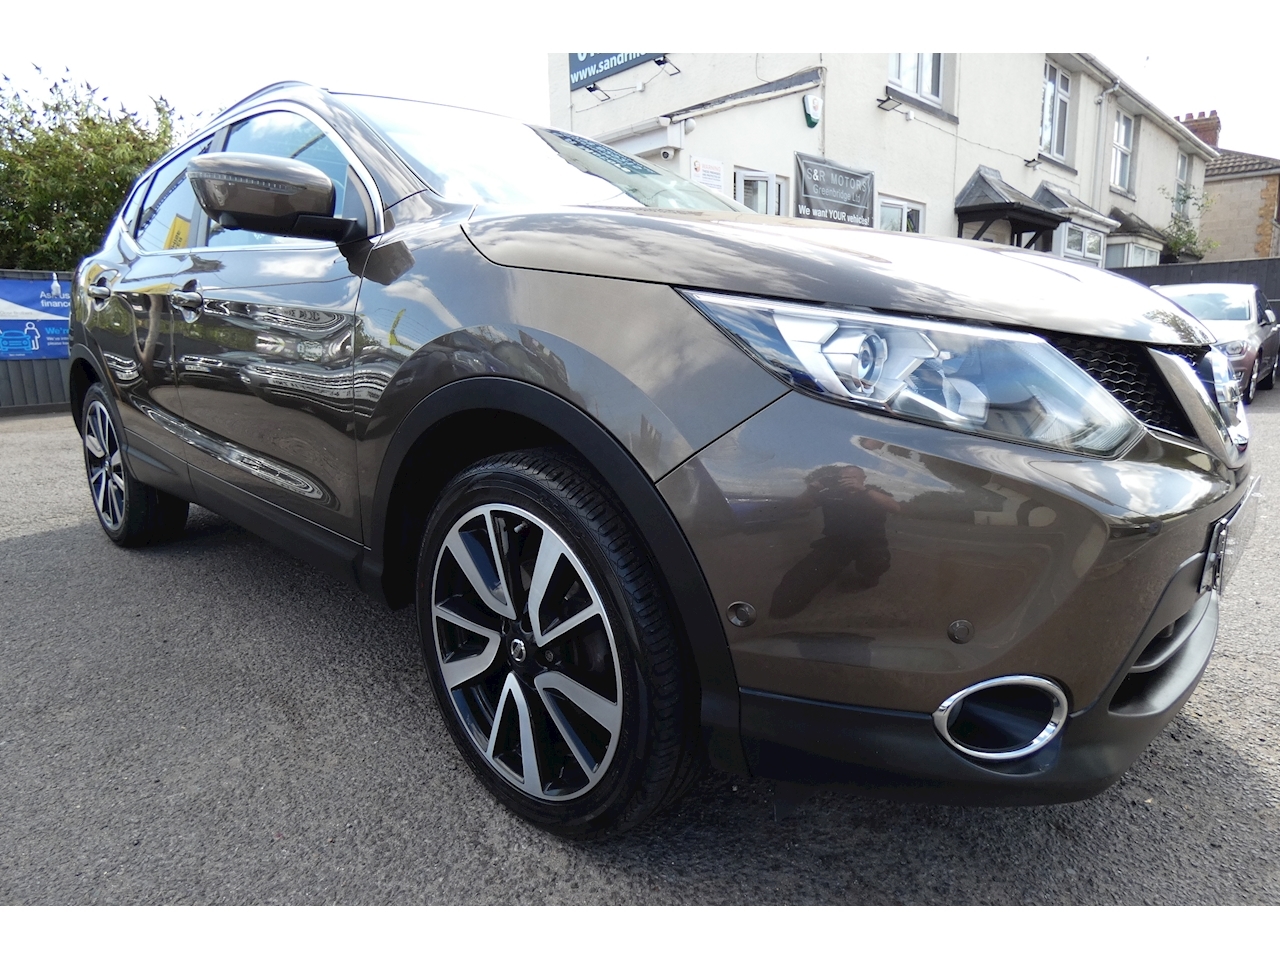 1.5 dCi Tekna SUV 5dr Diesel Manual 2WD Euro 5 (s/s) (110 ps)